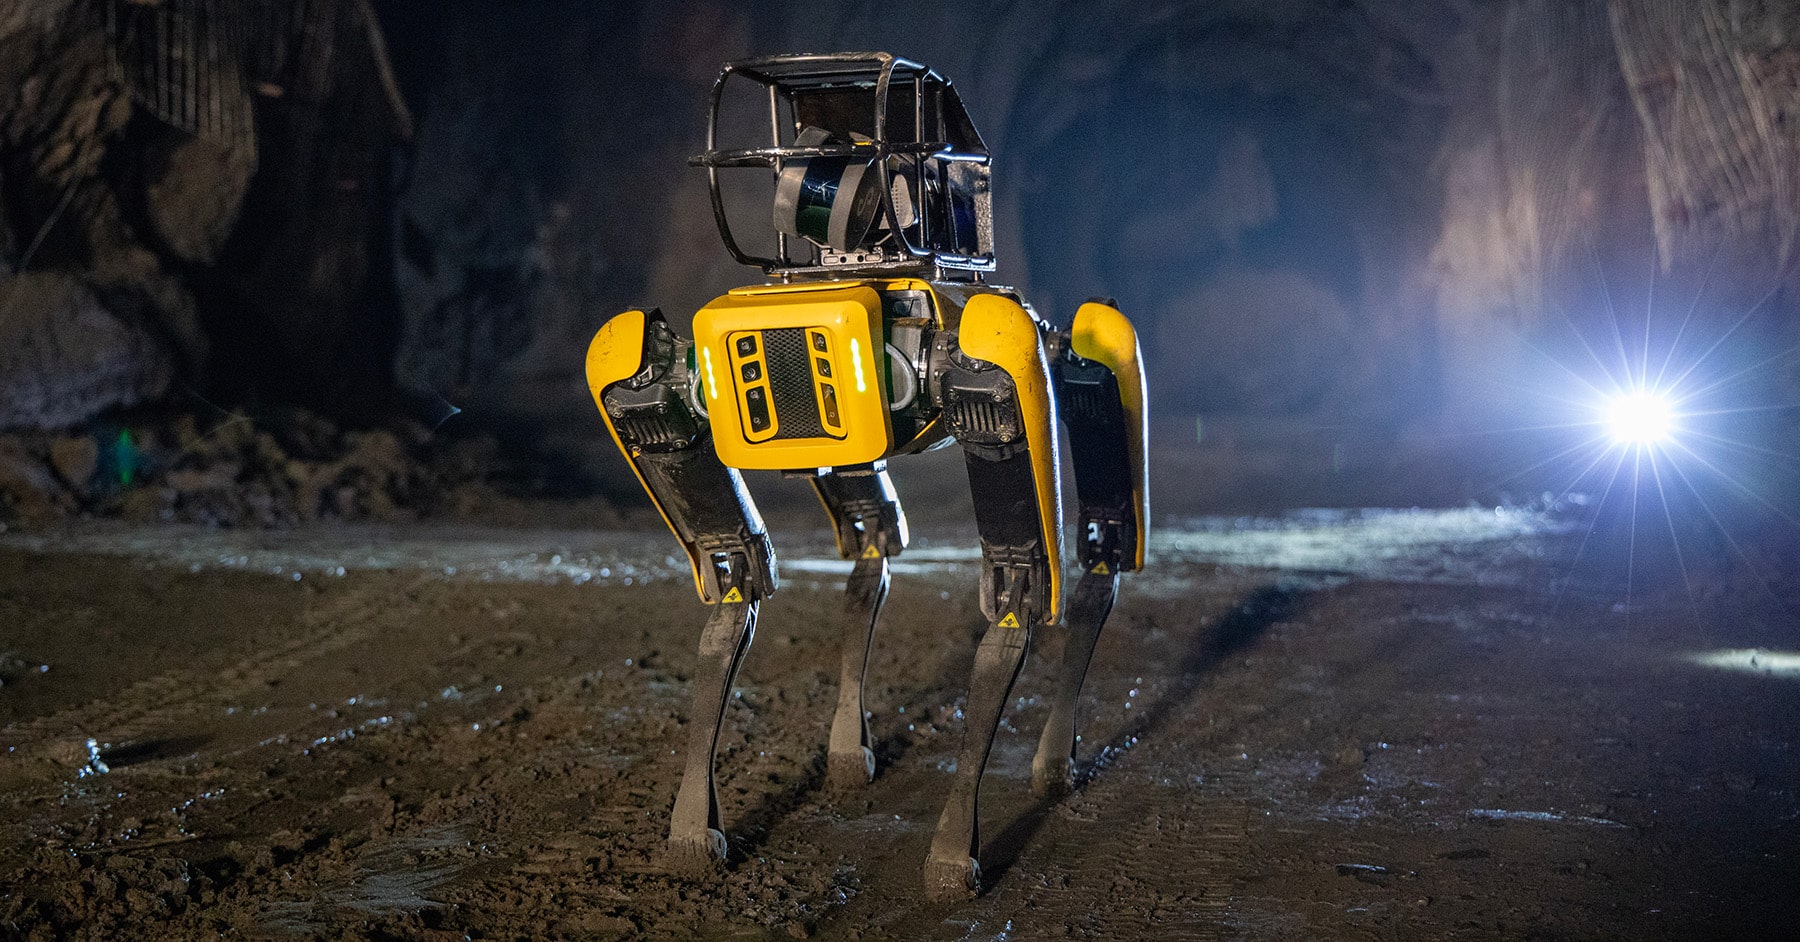 Spot underground in a mine with lidar and other payloads for navigation and inspection